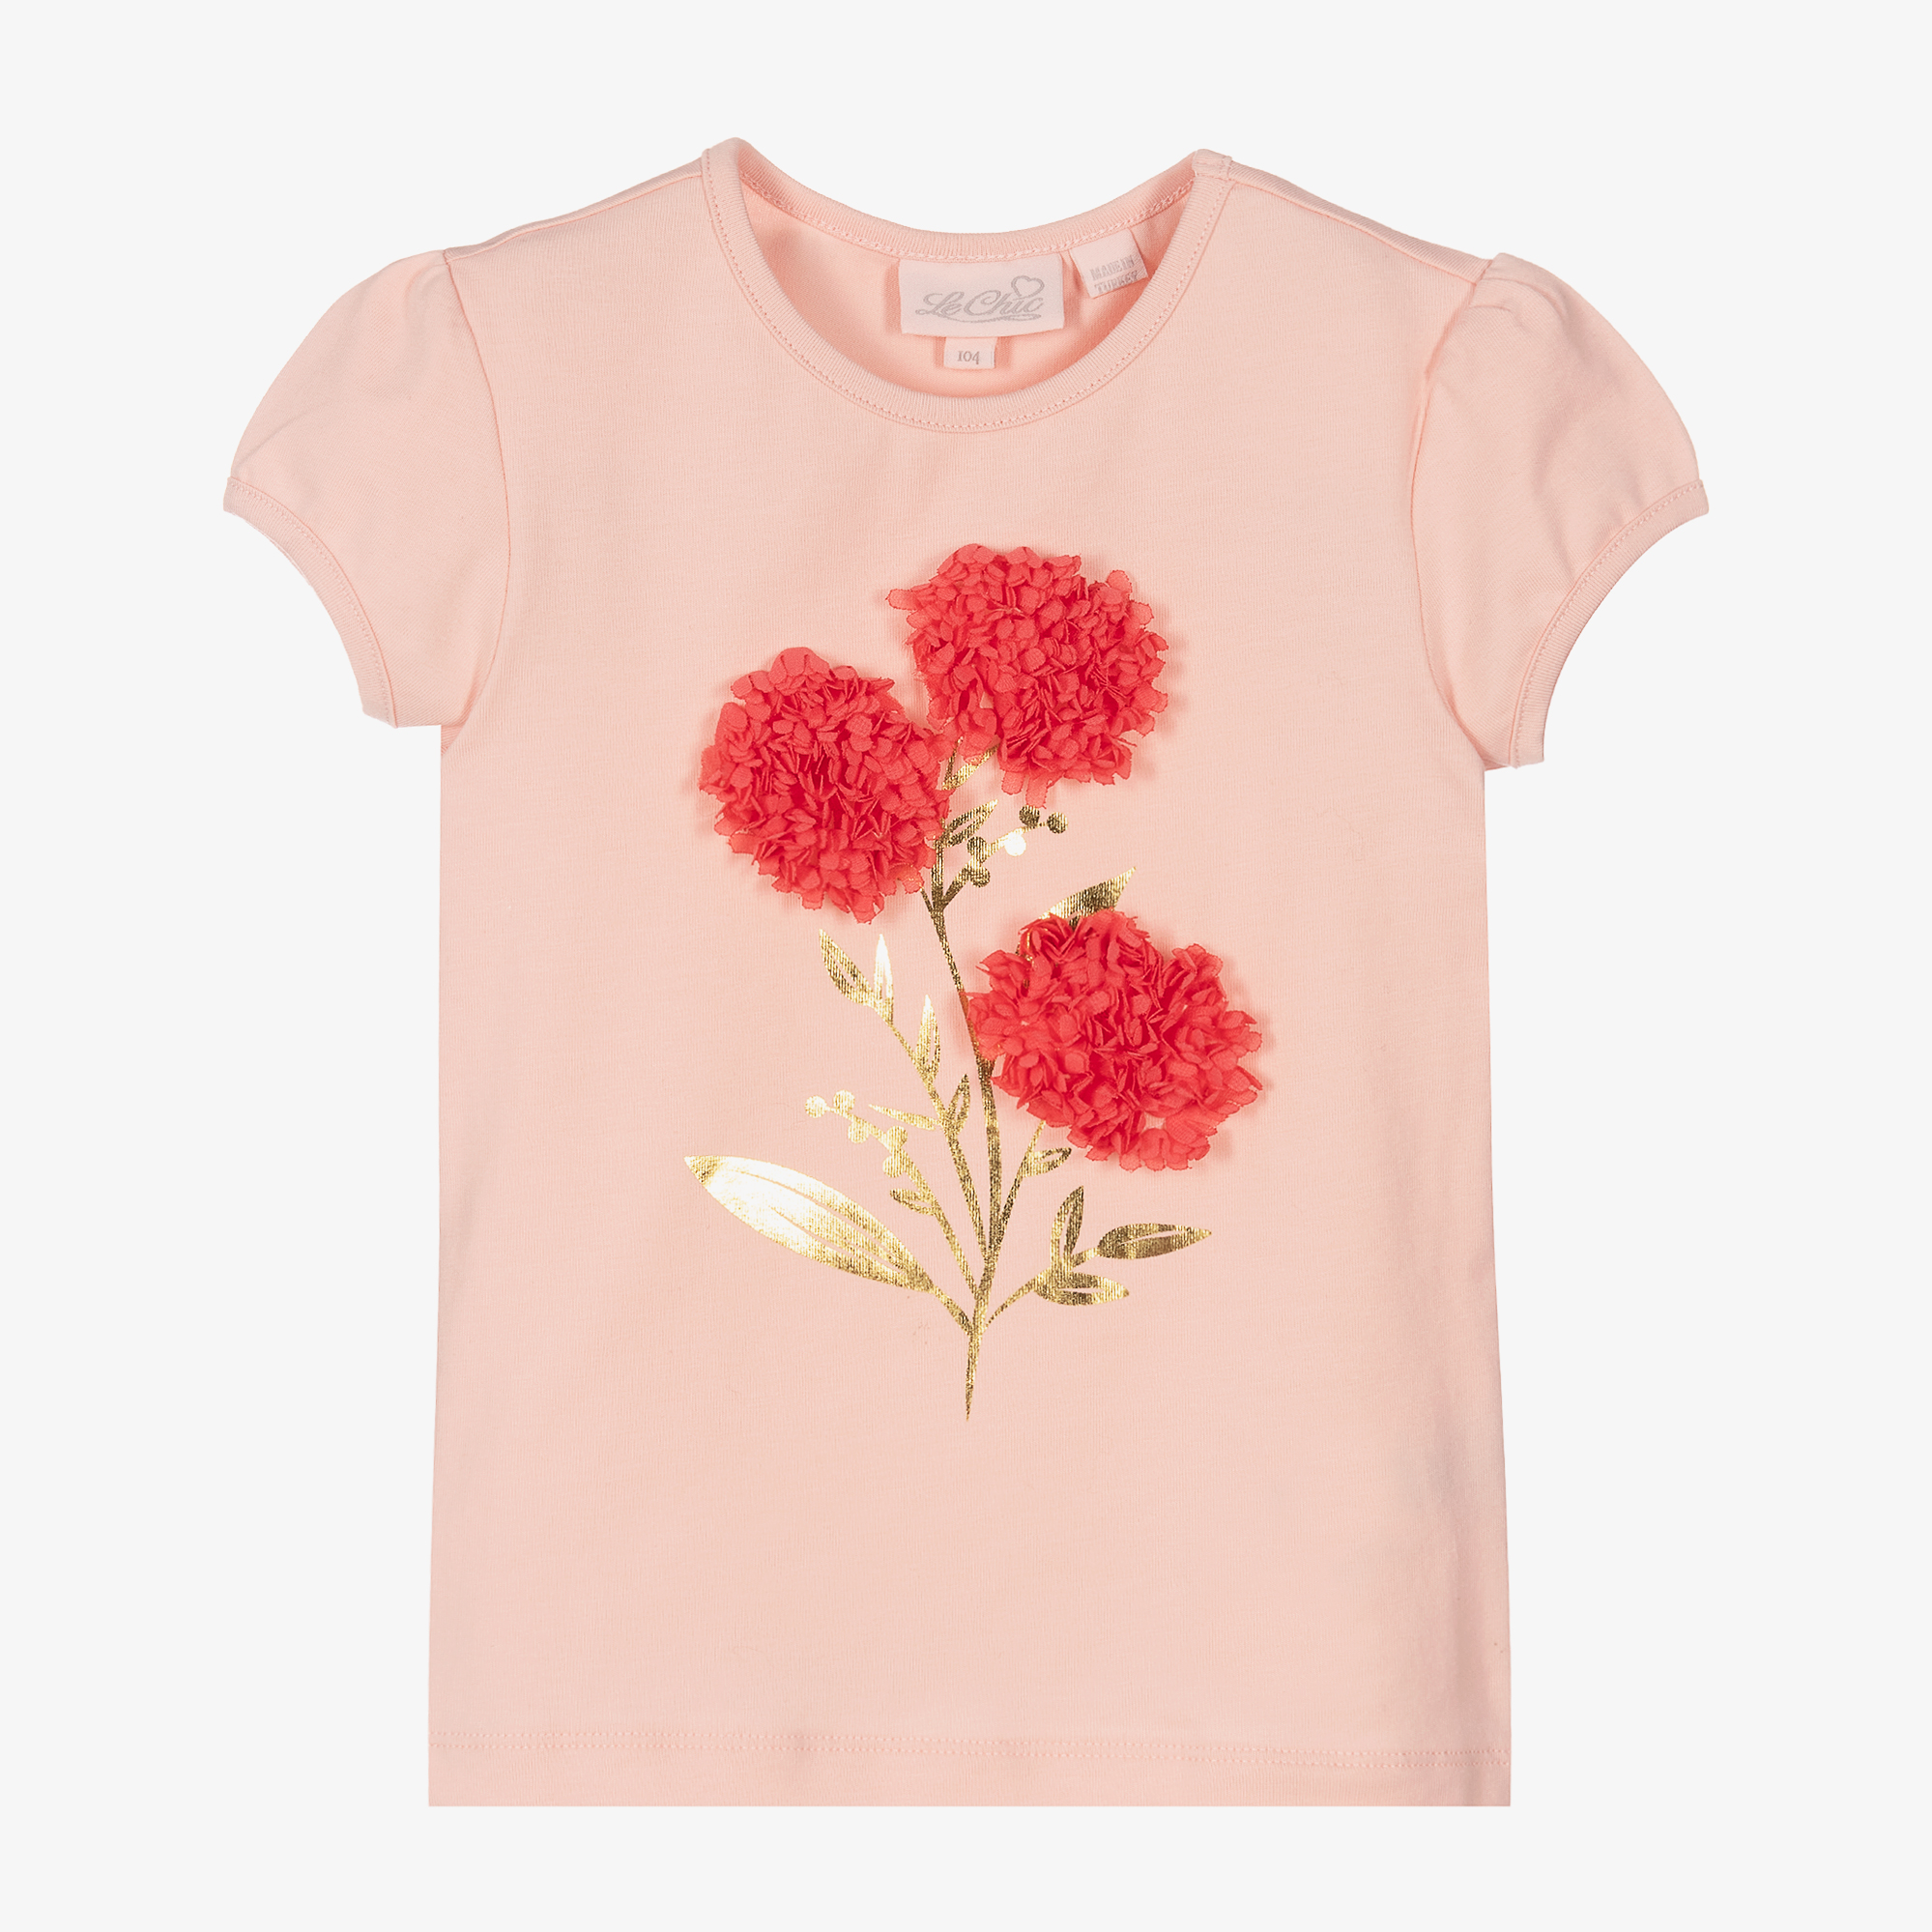 Toelating Omgeving Verouderd Le Chic - Pink Organic Cotton T-Shirt | Childrensalon Outlet